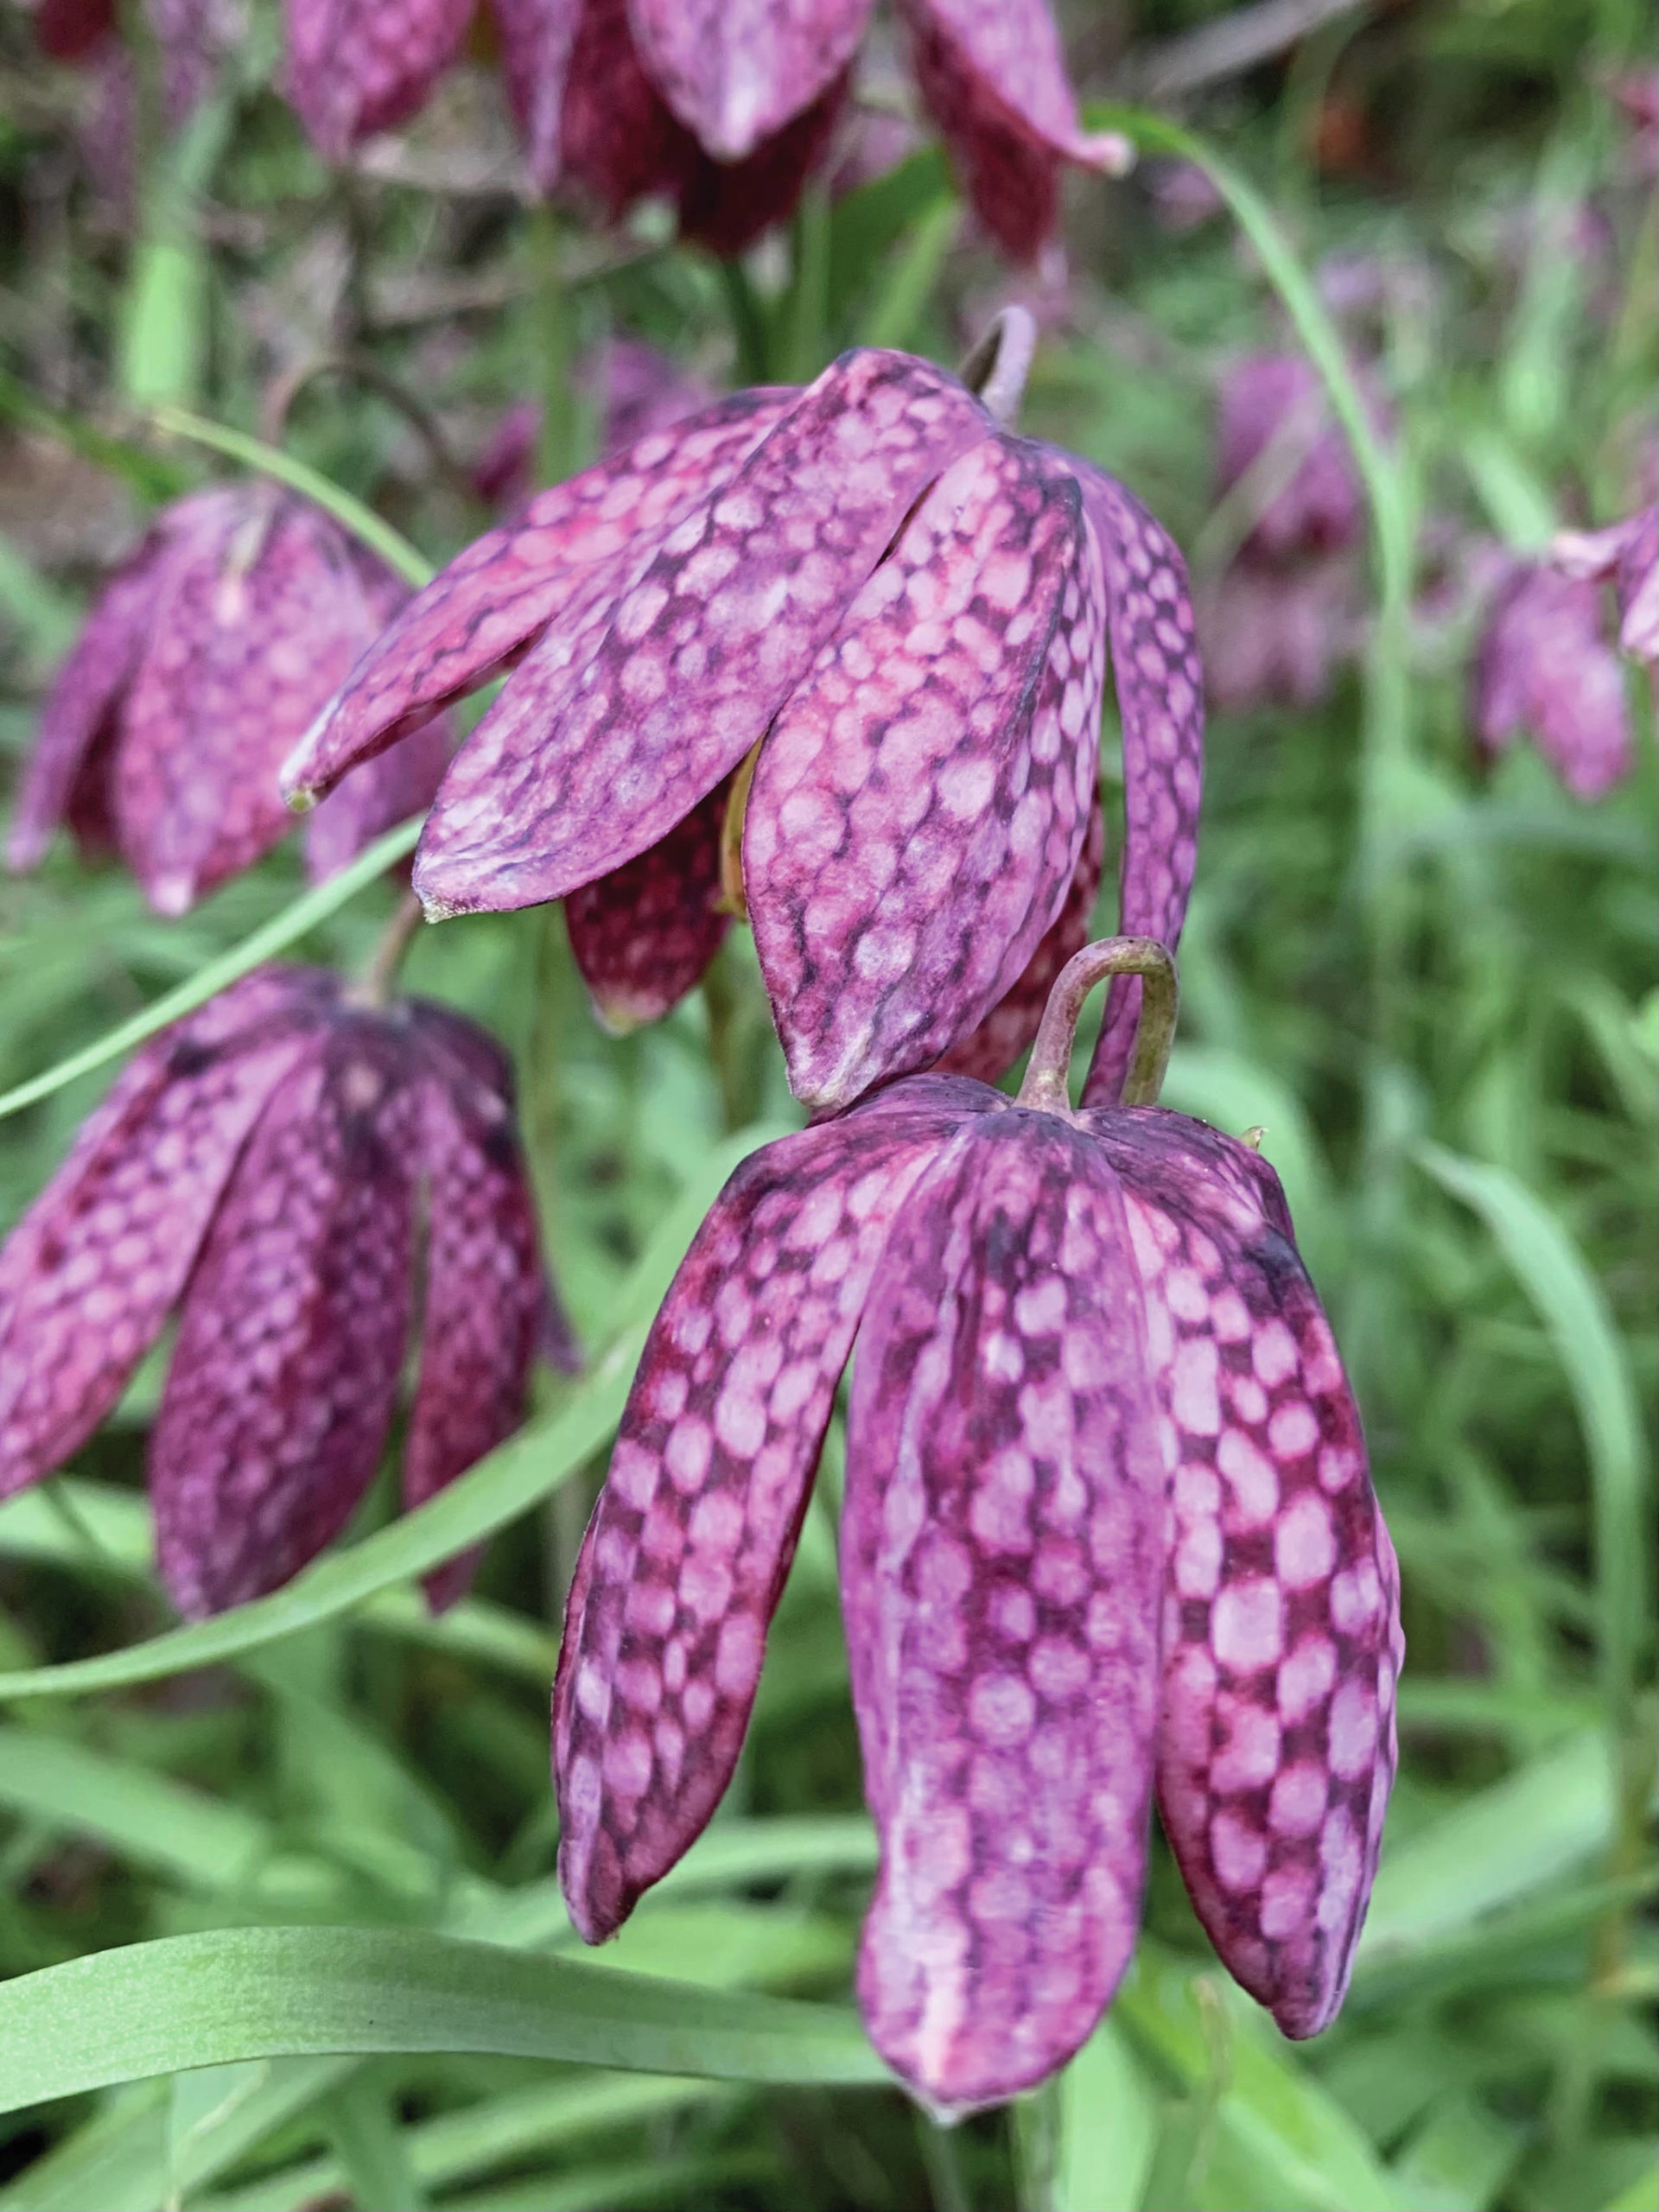 The fritillaria meleagris, commonly called checkered lily, is about 10 inches tall, seeds readily, and thrives in Homer’s misty moisty climate. (Photo by Rosemary Fitzpatrick)